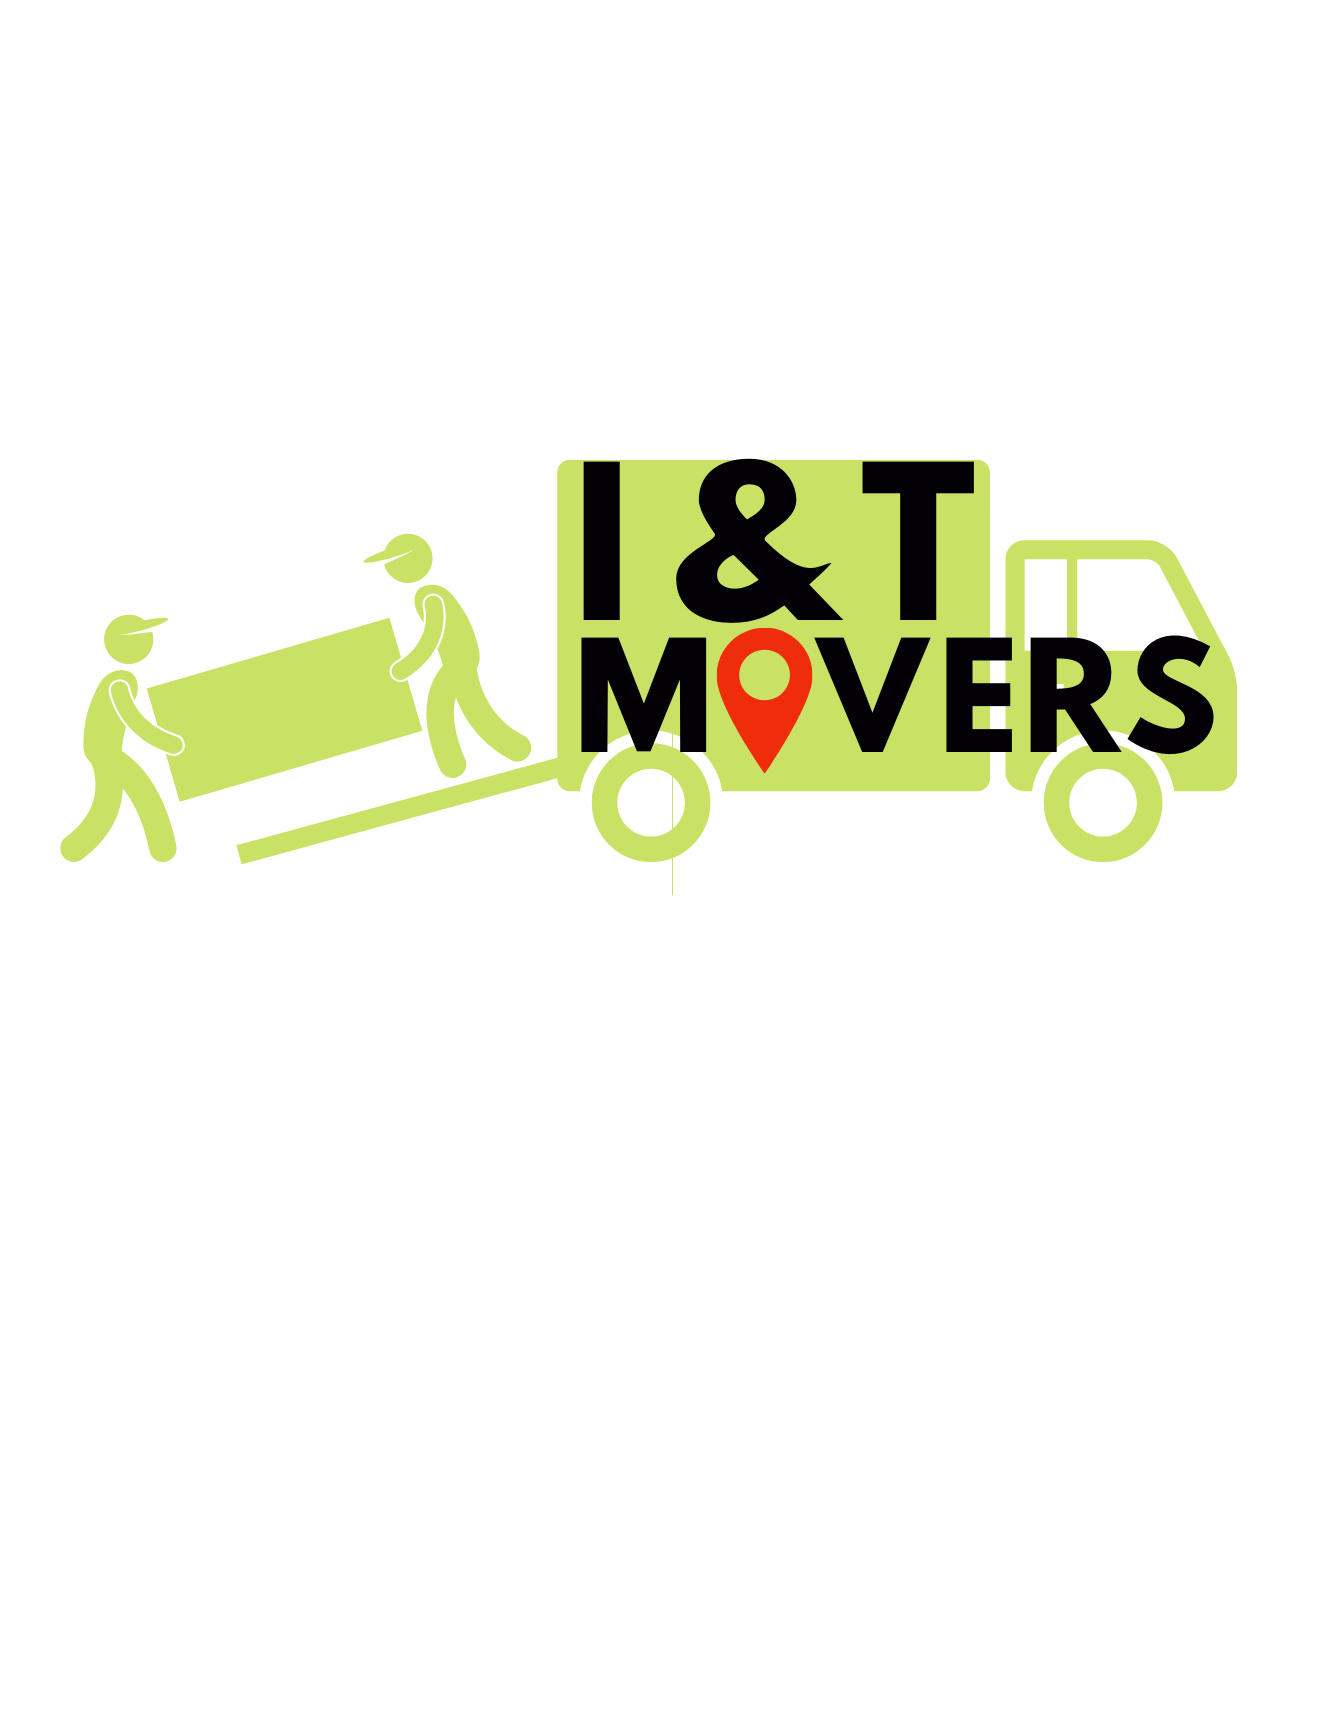 I and T Movers Logo